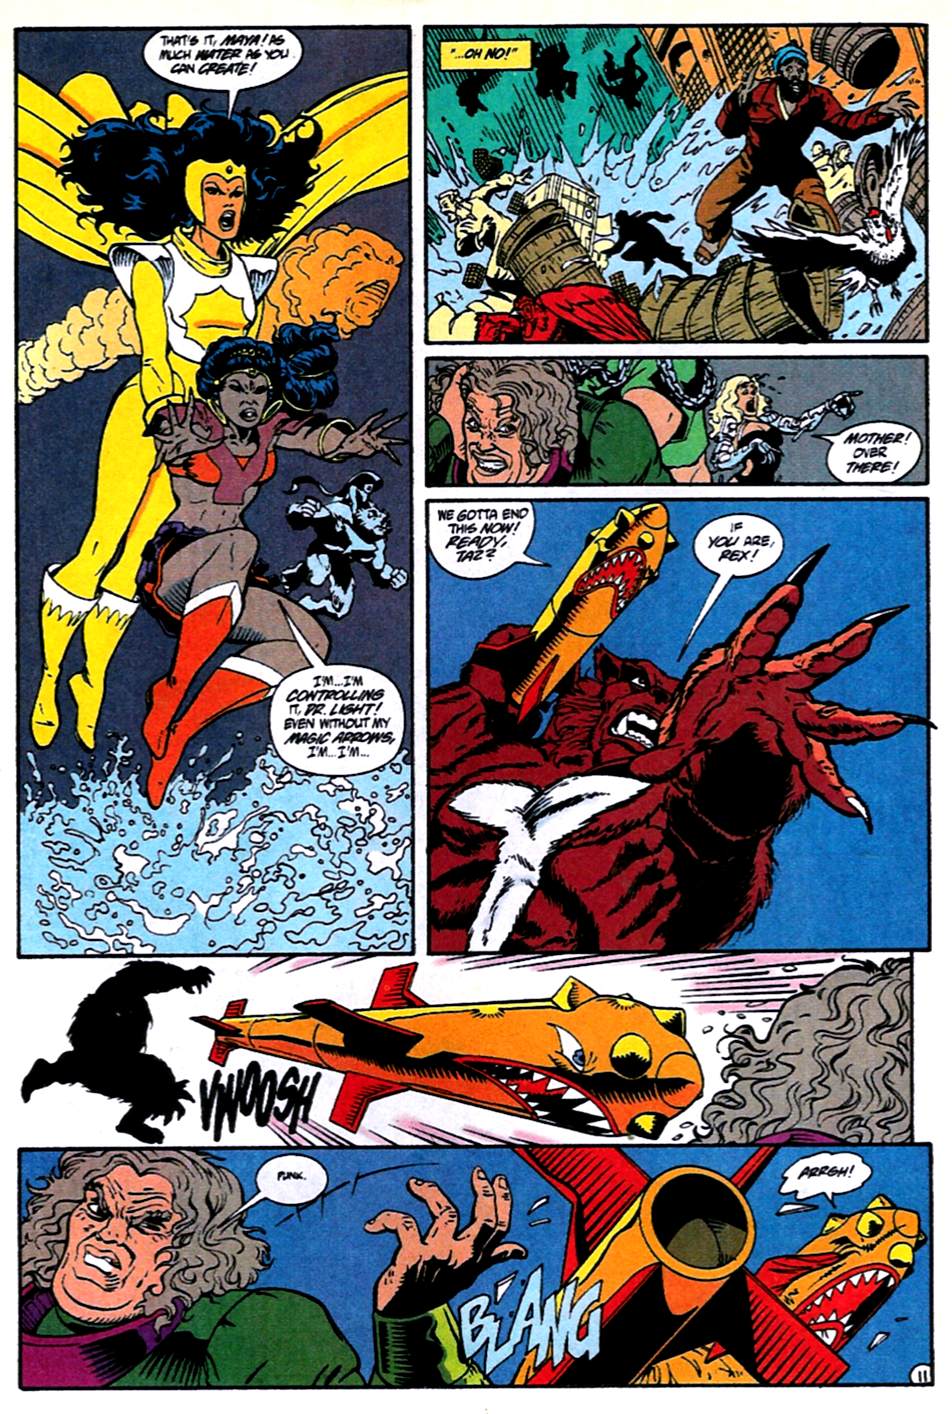 Justice League International (1993) 61 Page 11